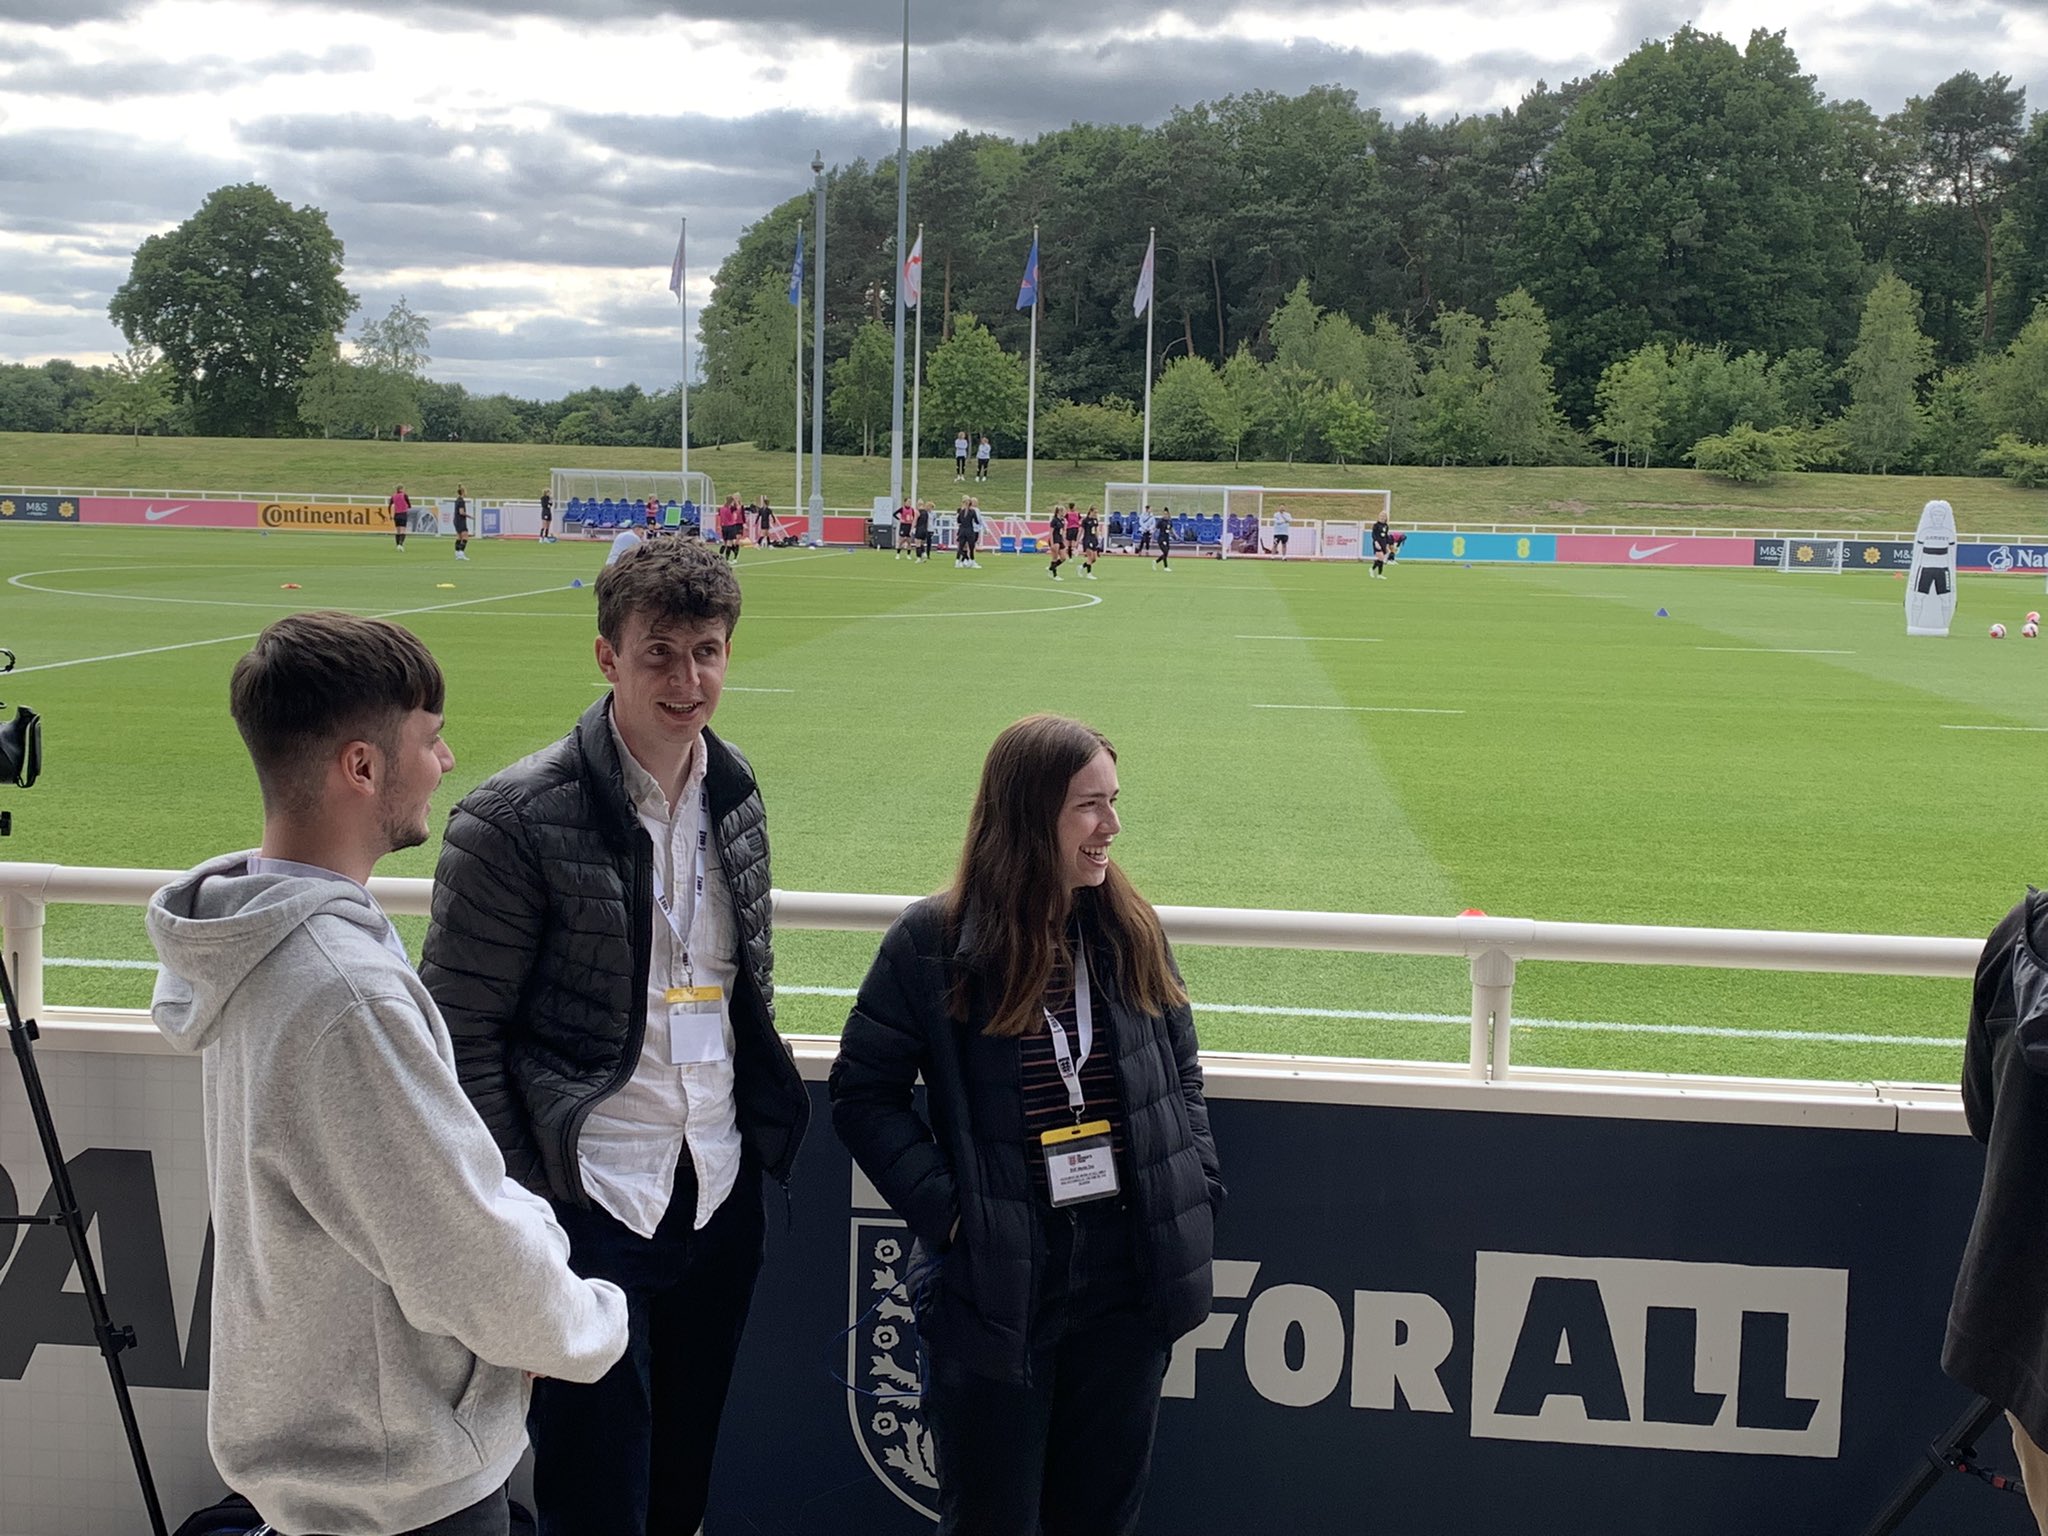 Students Ollie Spencer, Tom Alston and Megan Garbutt attended the Lionesses' open training day.